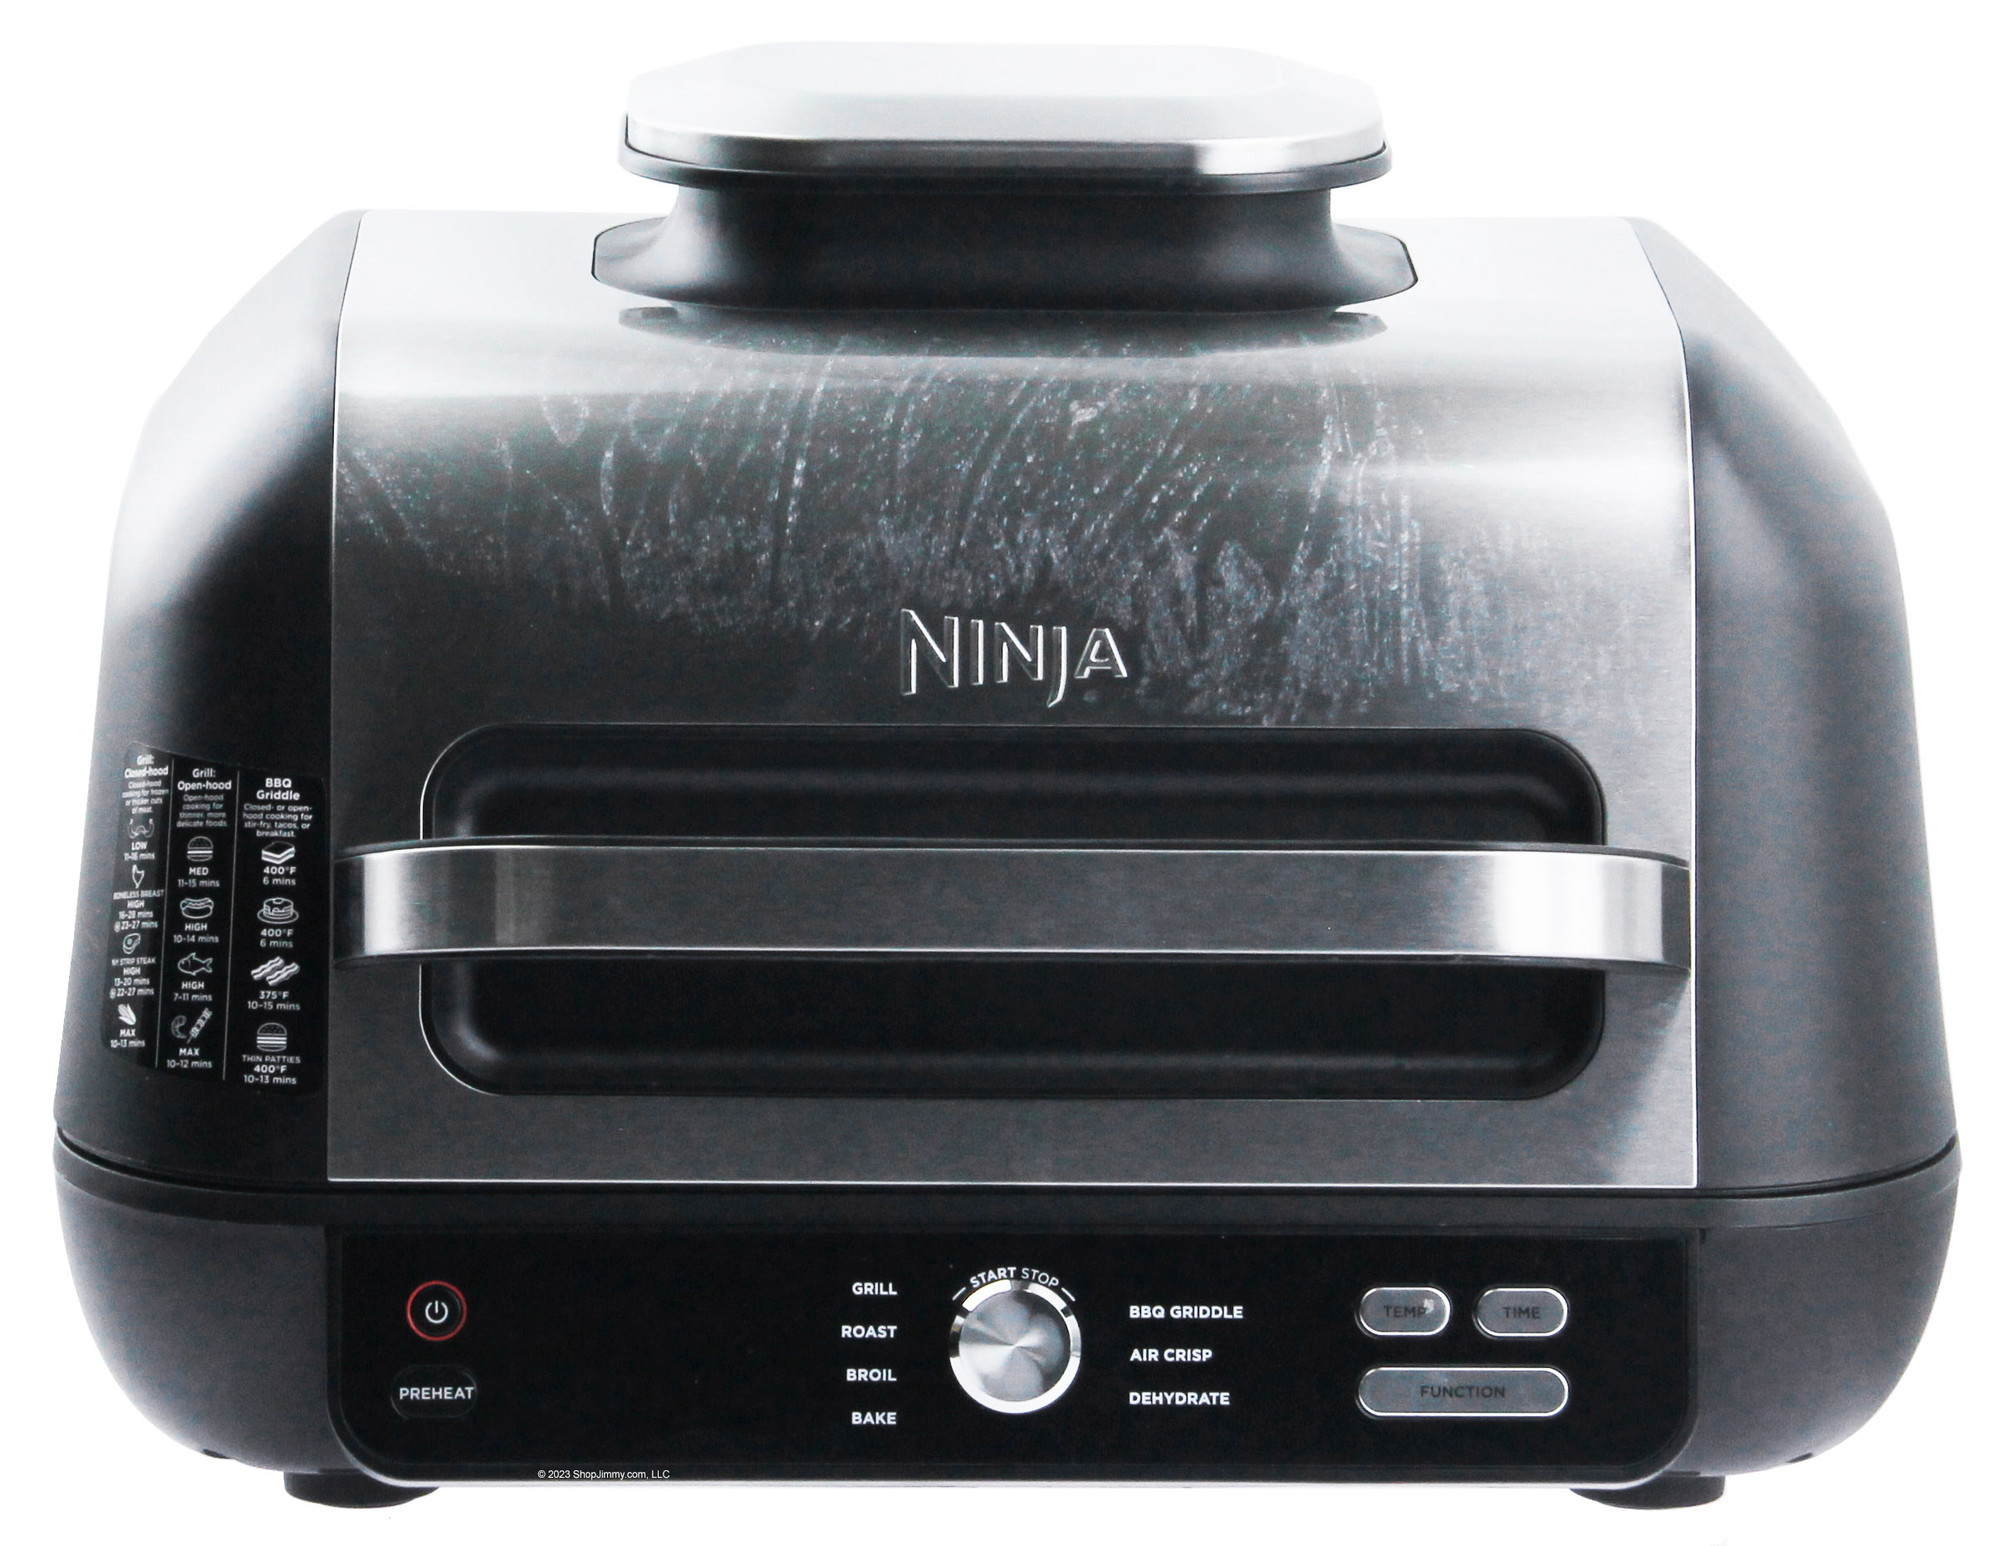 Ninja Foodi XL Pro Grill & Griddle 7-in-1 Replacement Base IG601